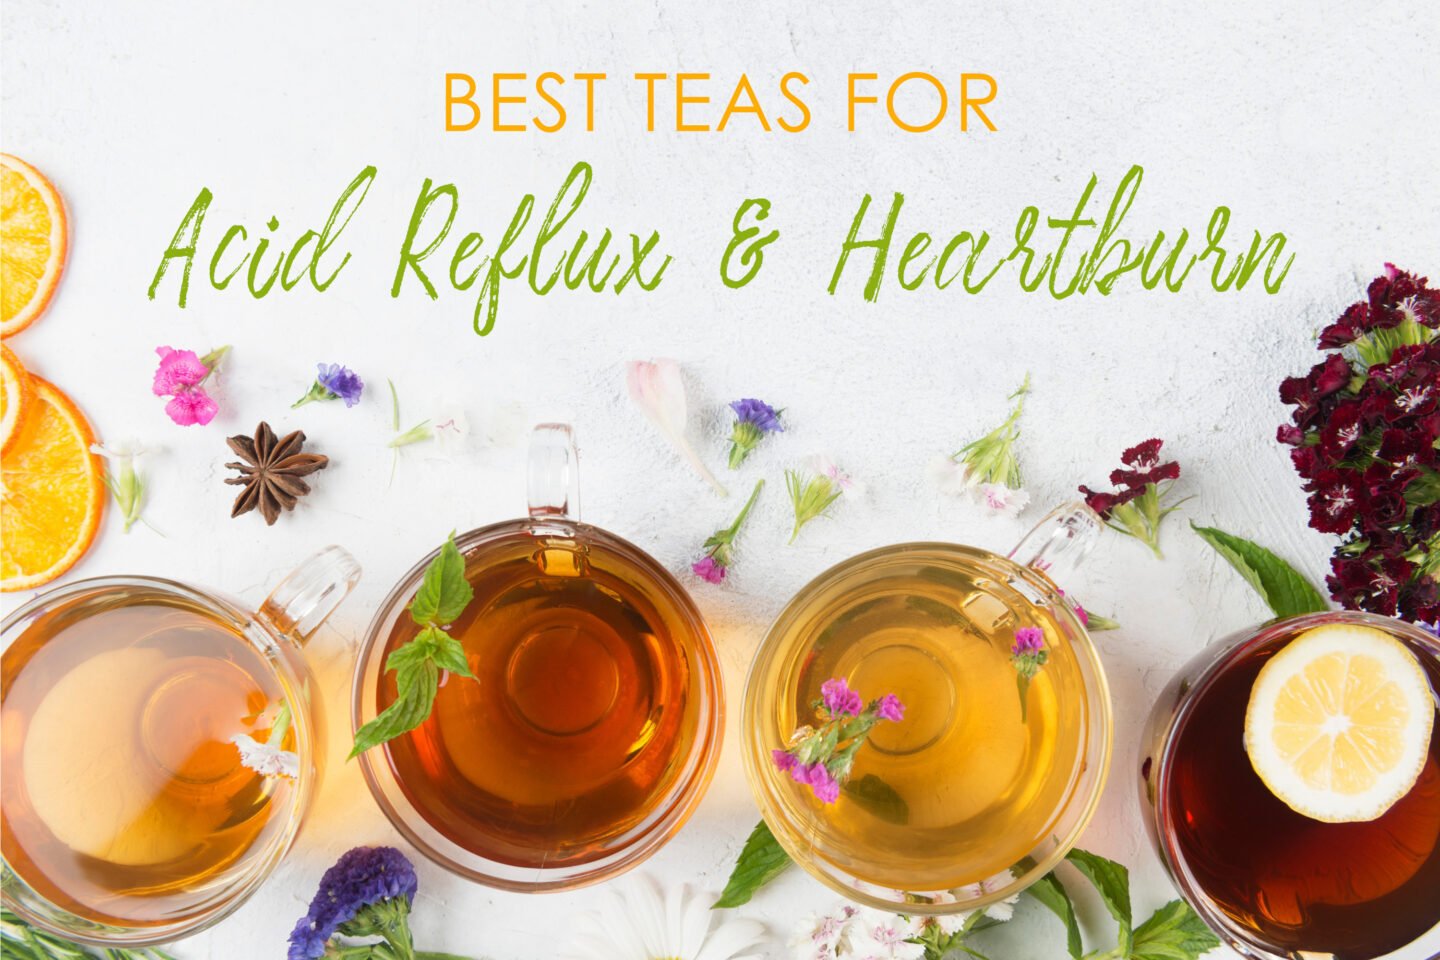 best teas for acid reflux and heartburn relief